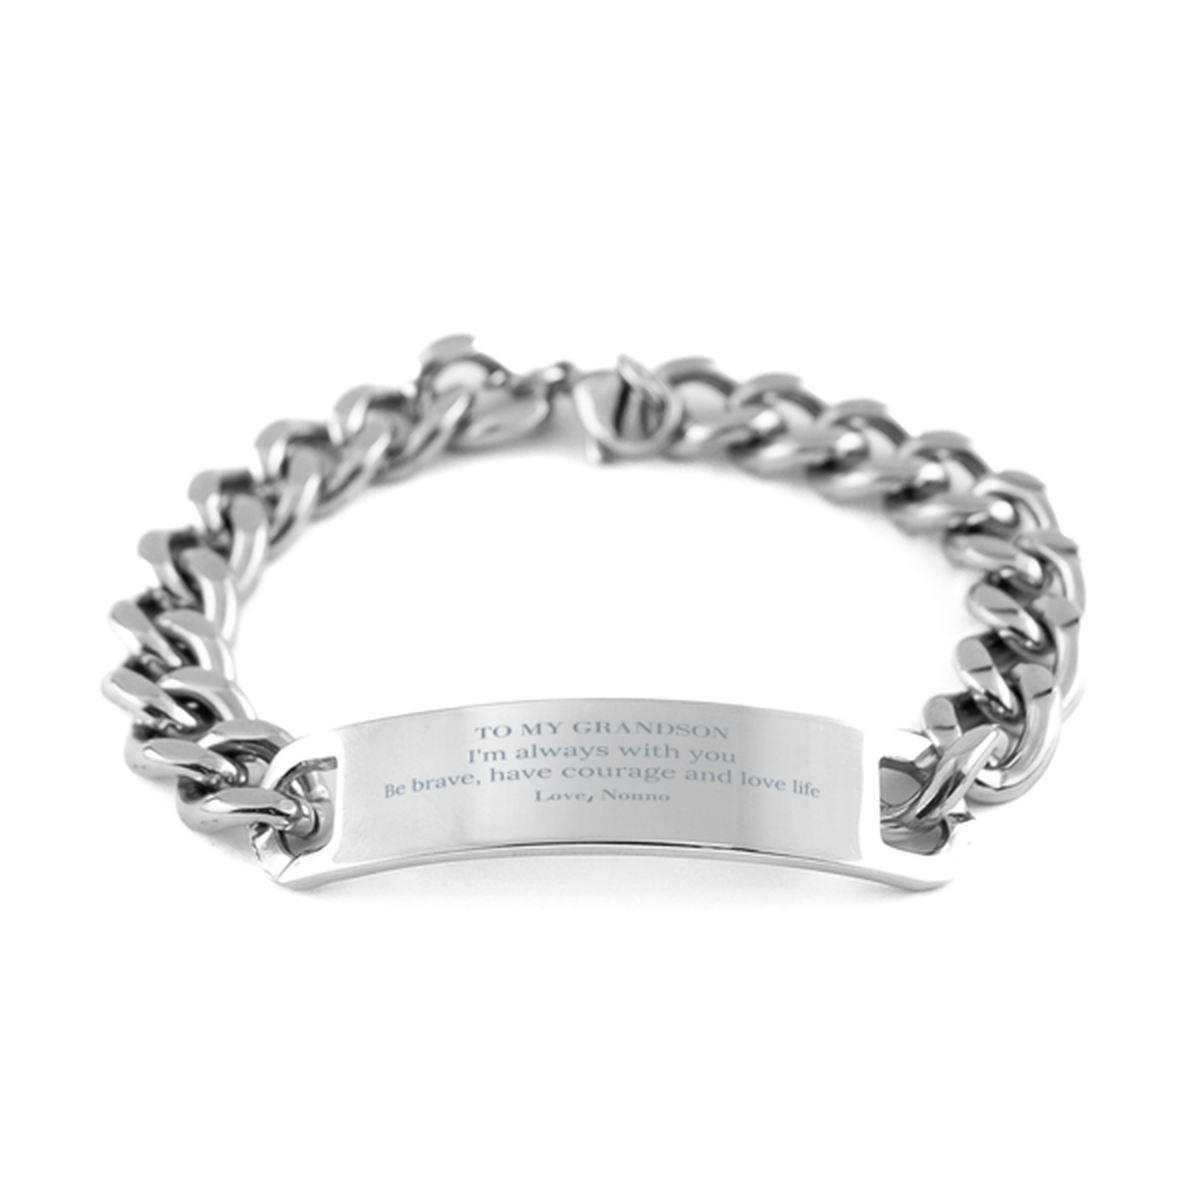 To My Grandson Gifts from Nonno, Unique Cuban Chain Stainless Steel Bracelet Inspirational Christmas Birthday Graduation Gifts for Grandson I'm always with you. Be brave, have courage and love life. Love, Nonno